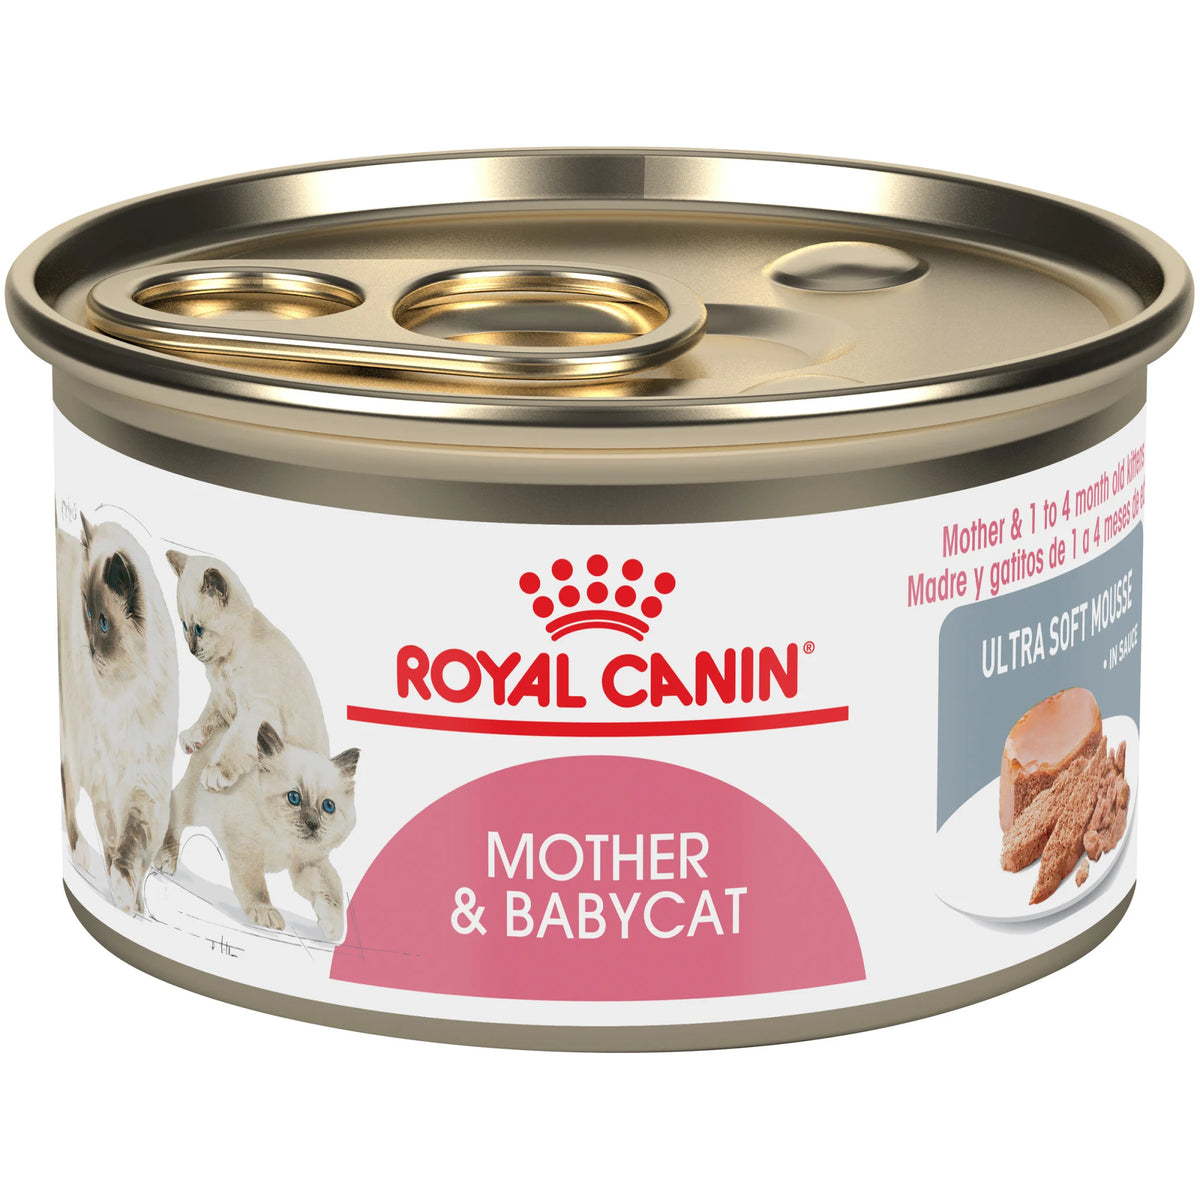 RC Mother Babycat Canned Food 3oz 24/pk